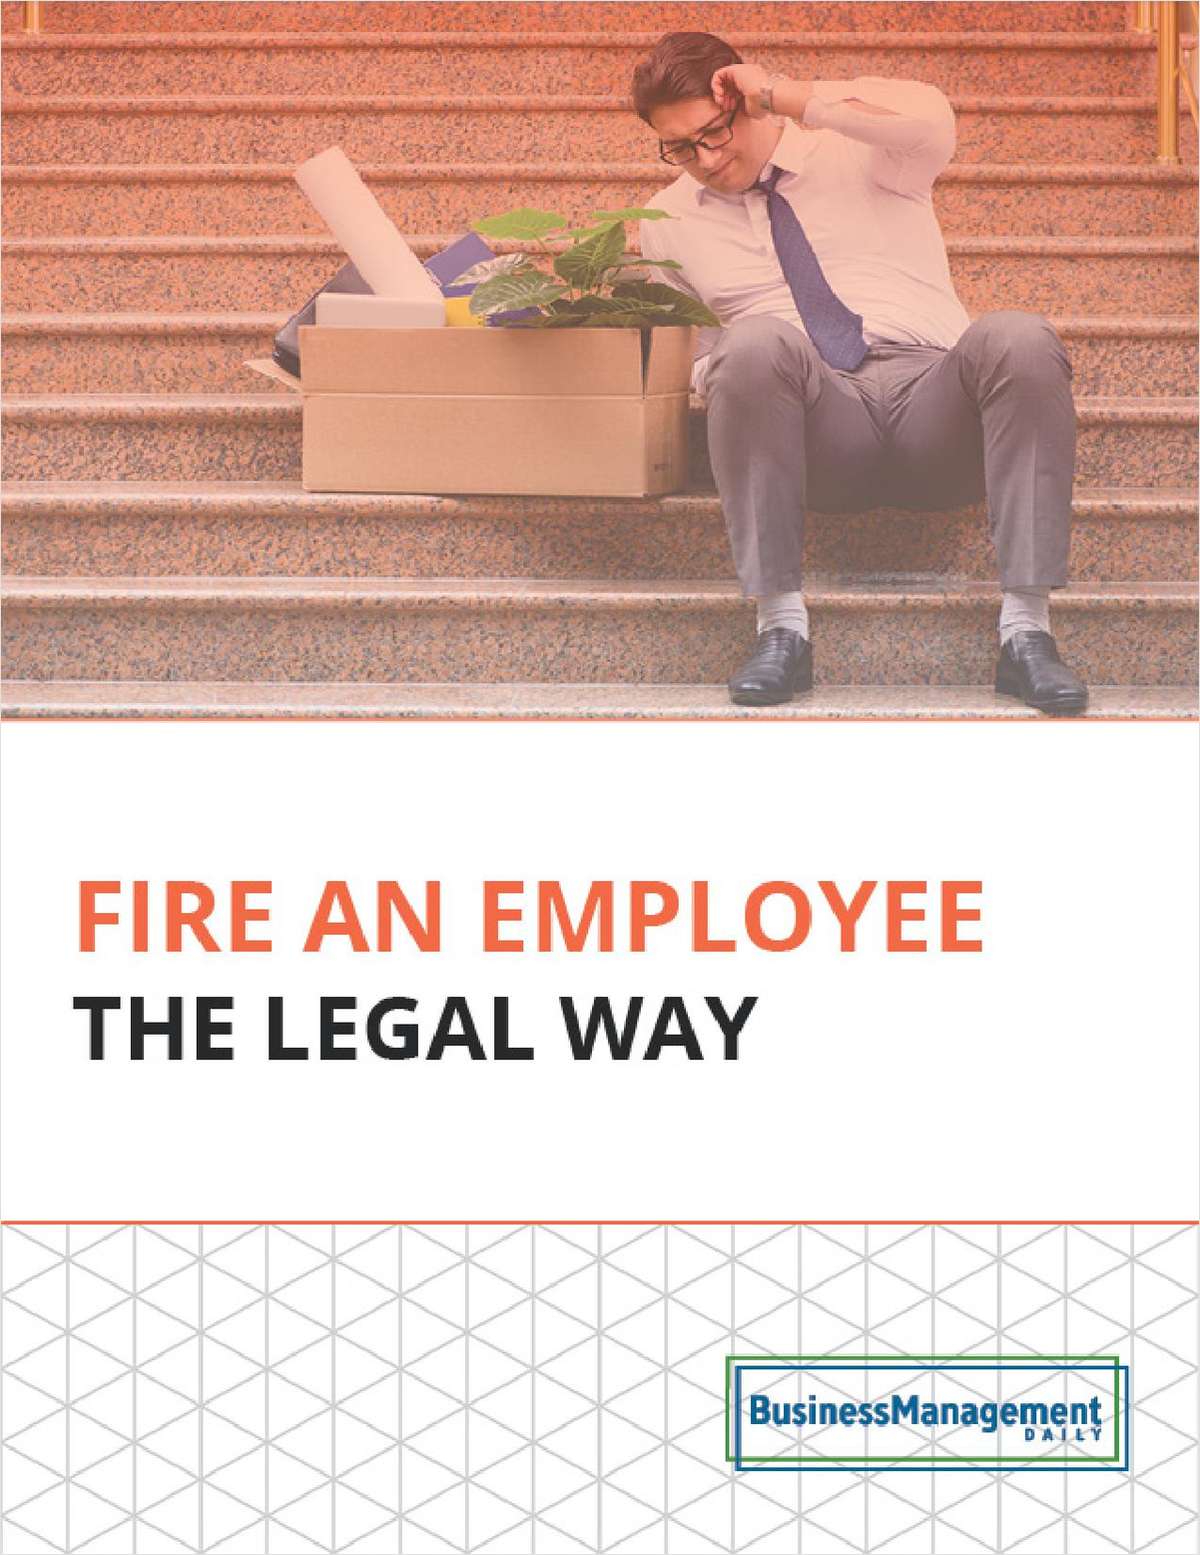 How To Fire An Employee The Legal Way